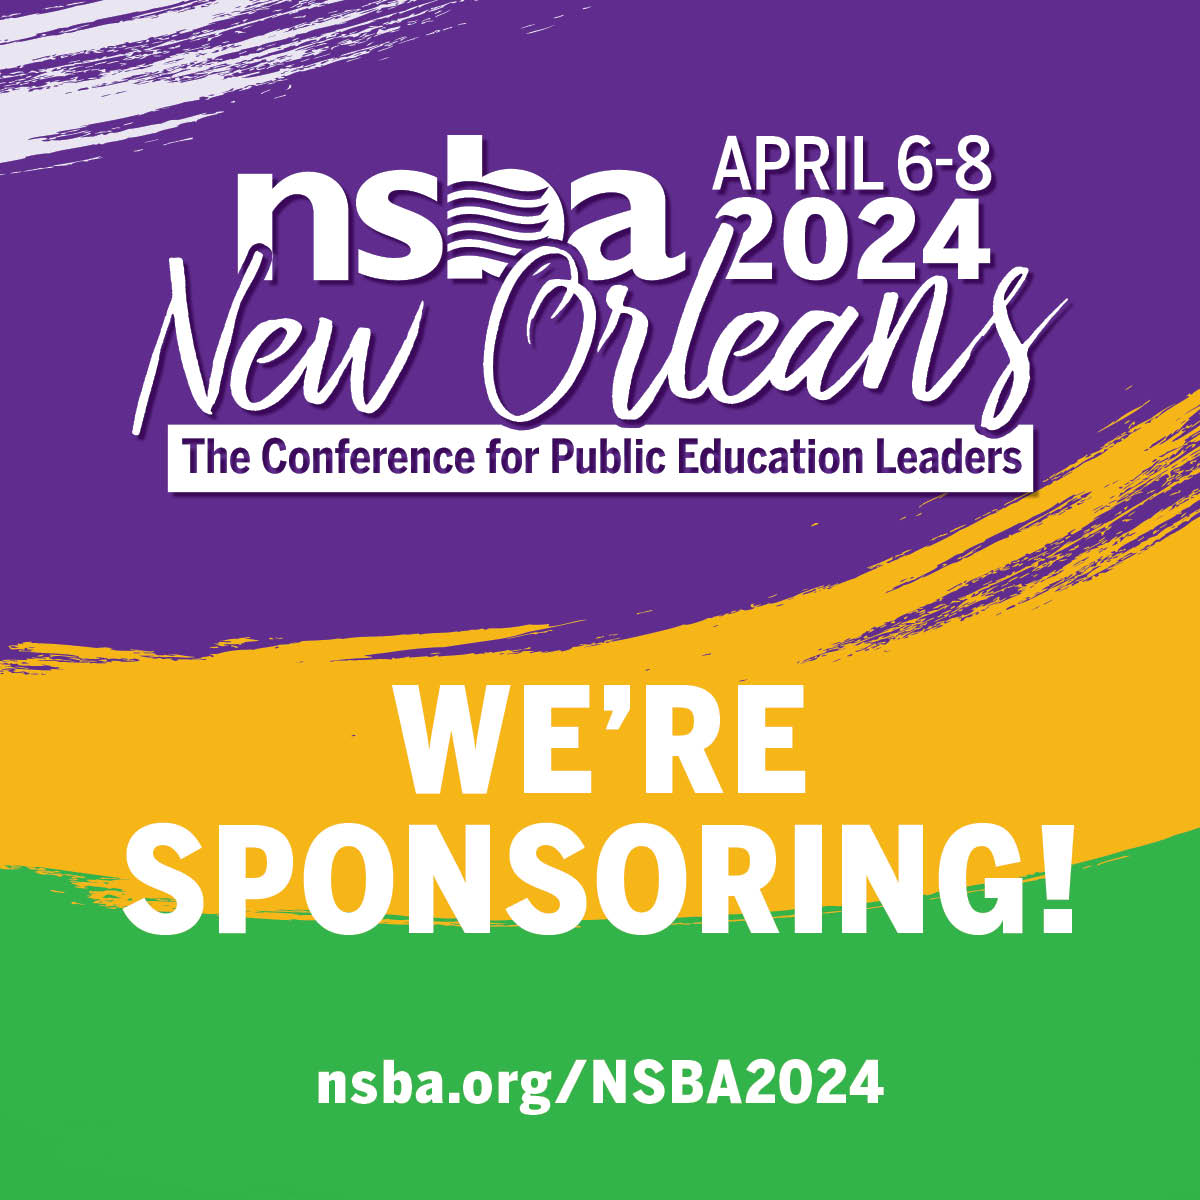 Social Media Badges NSBA 2024 Annual Conference & Exposition